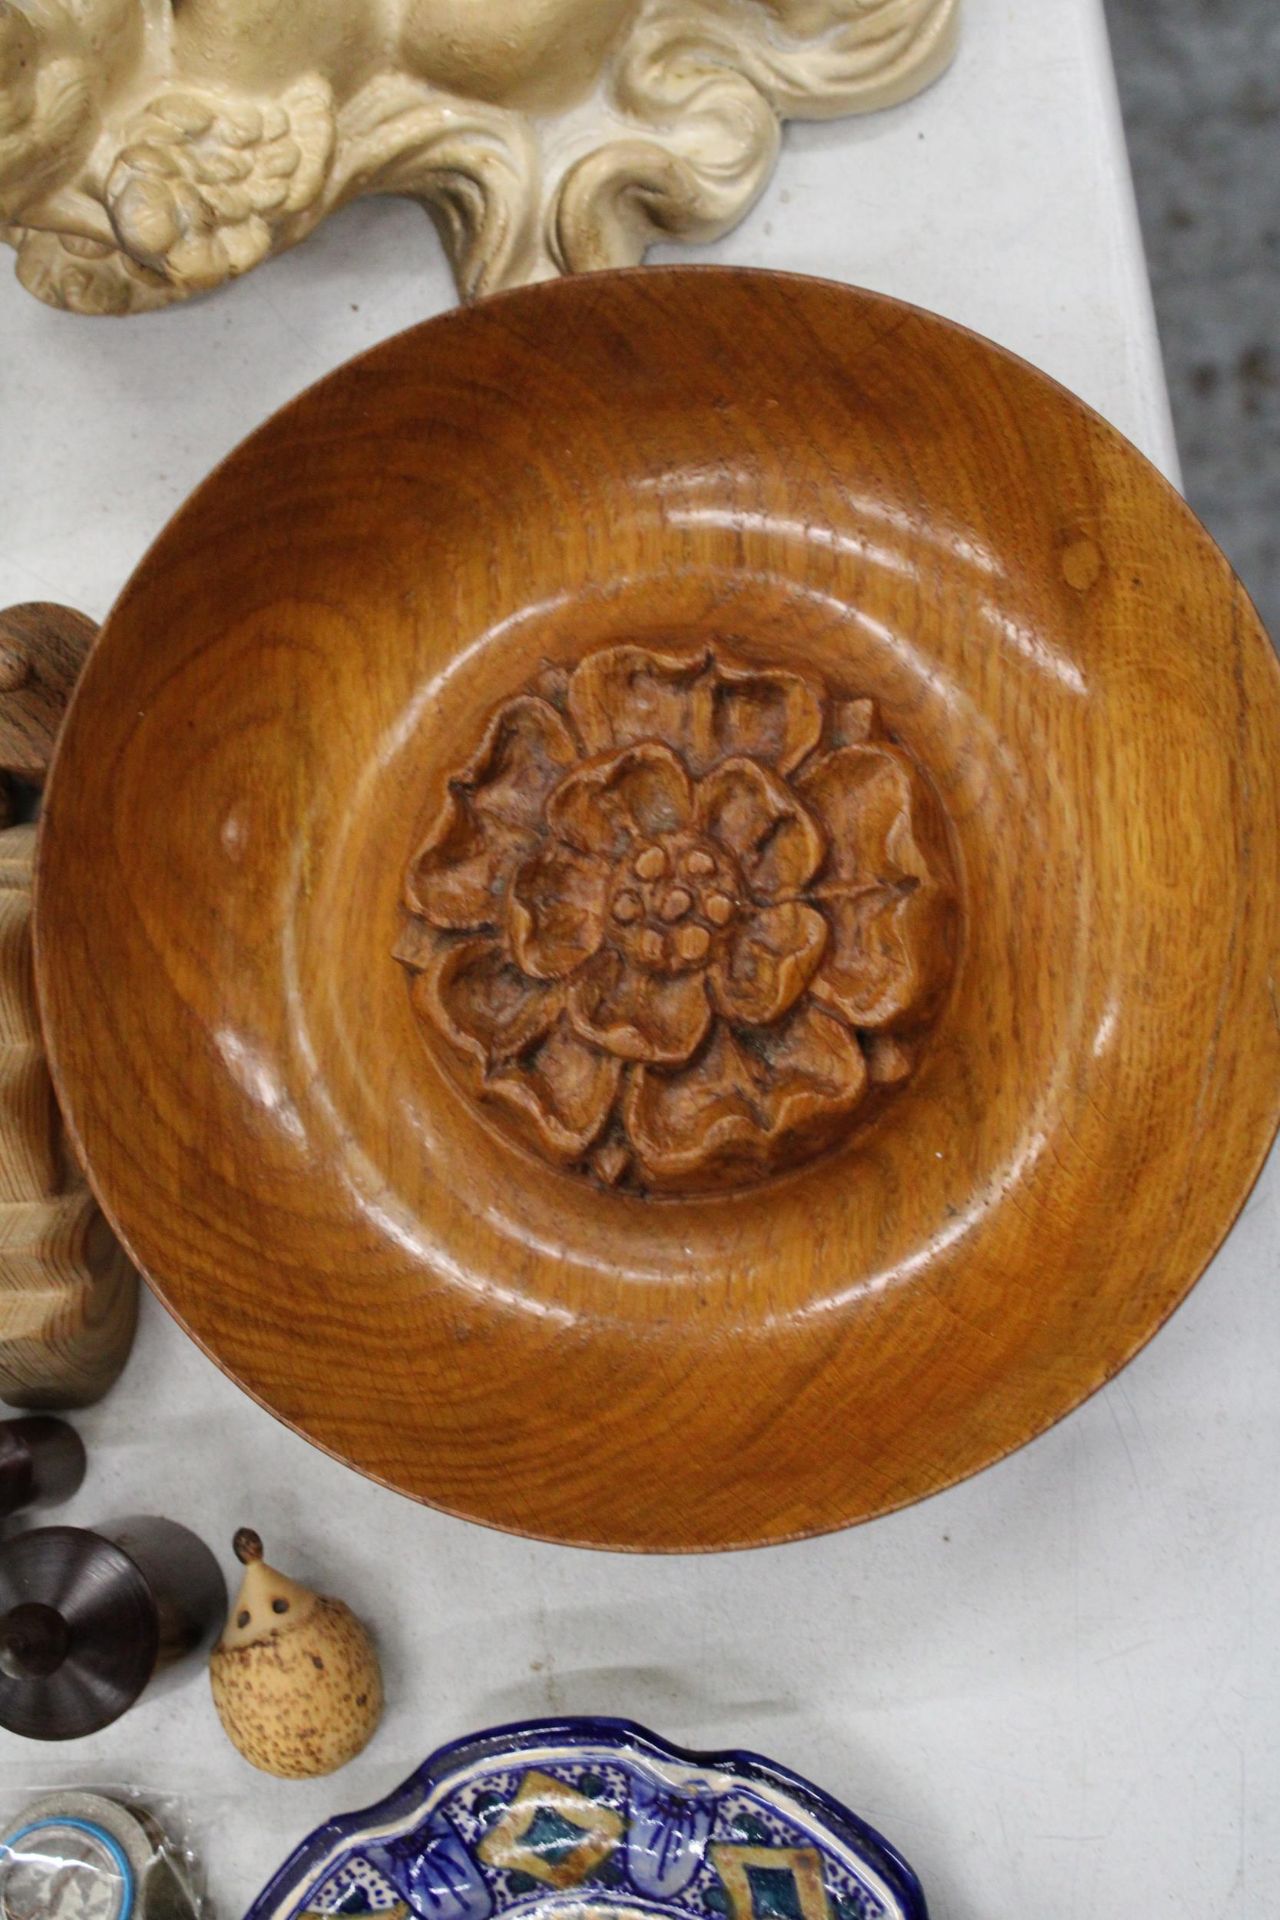 A QUANTITY OF ITEMS TO INCLUDE TREEN BOWLS, SMALL LIDDEDPOTS, MINIATURE ANIMALS, A TERRECOTTA BULL - Image 5 of 7